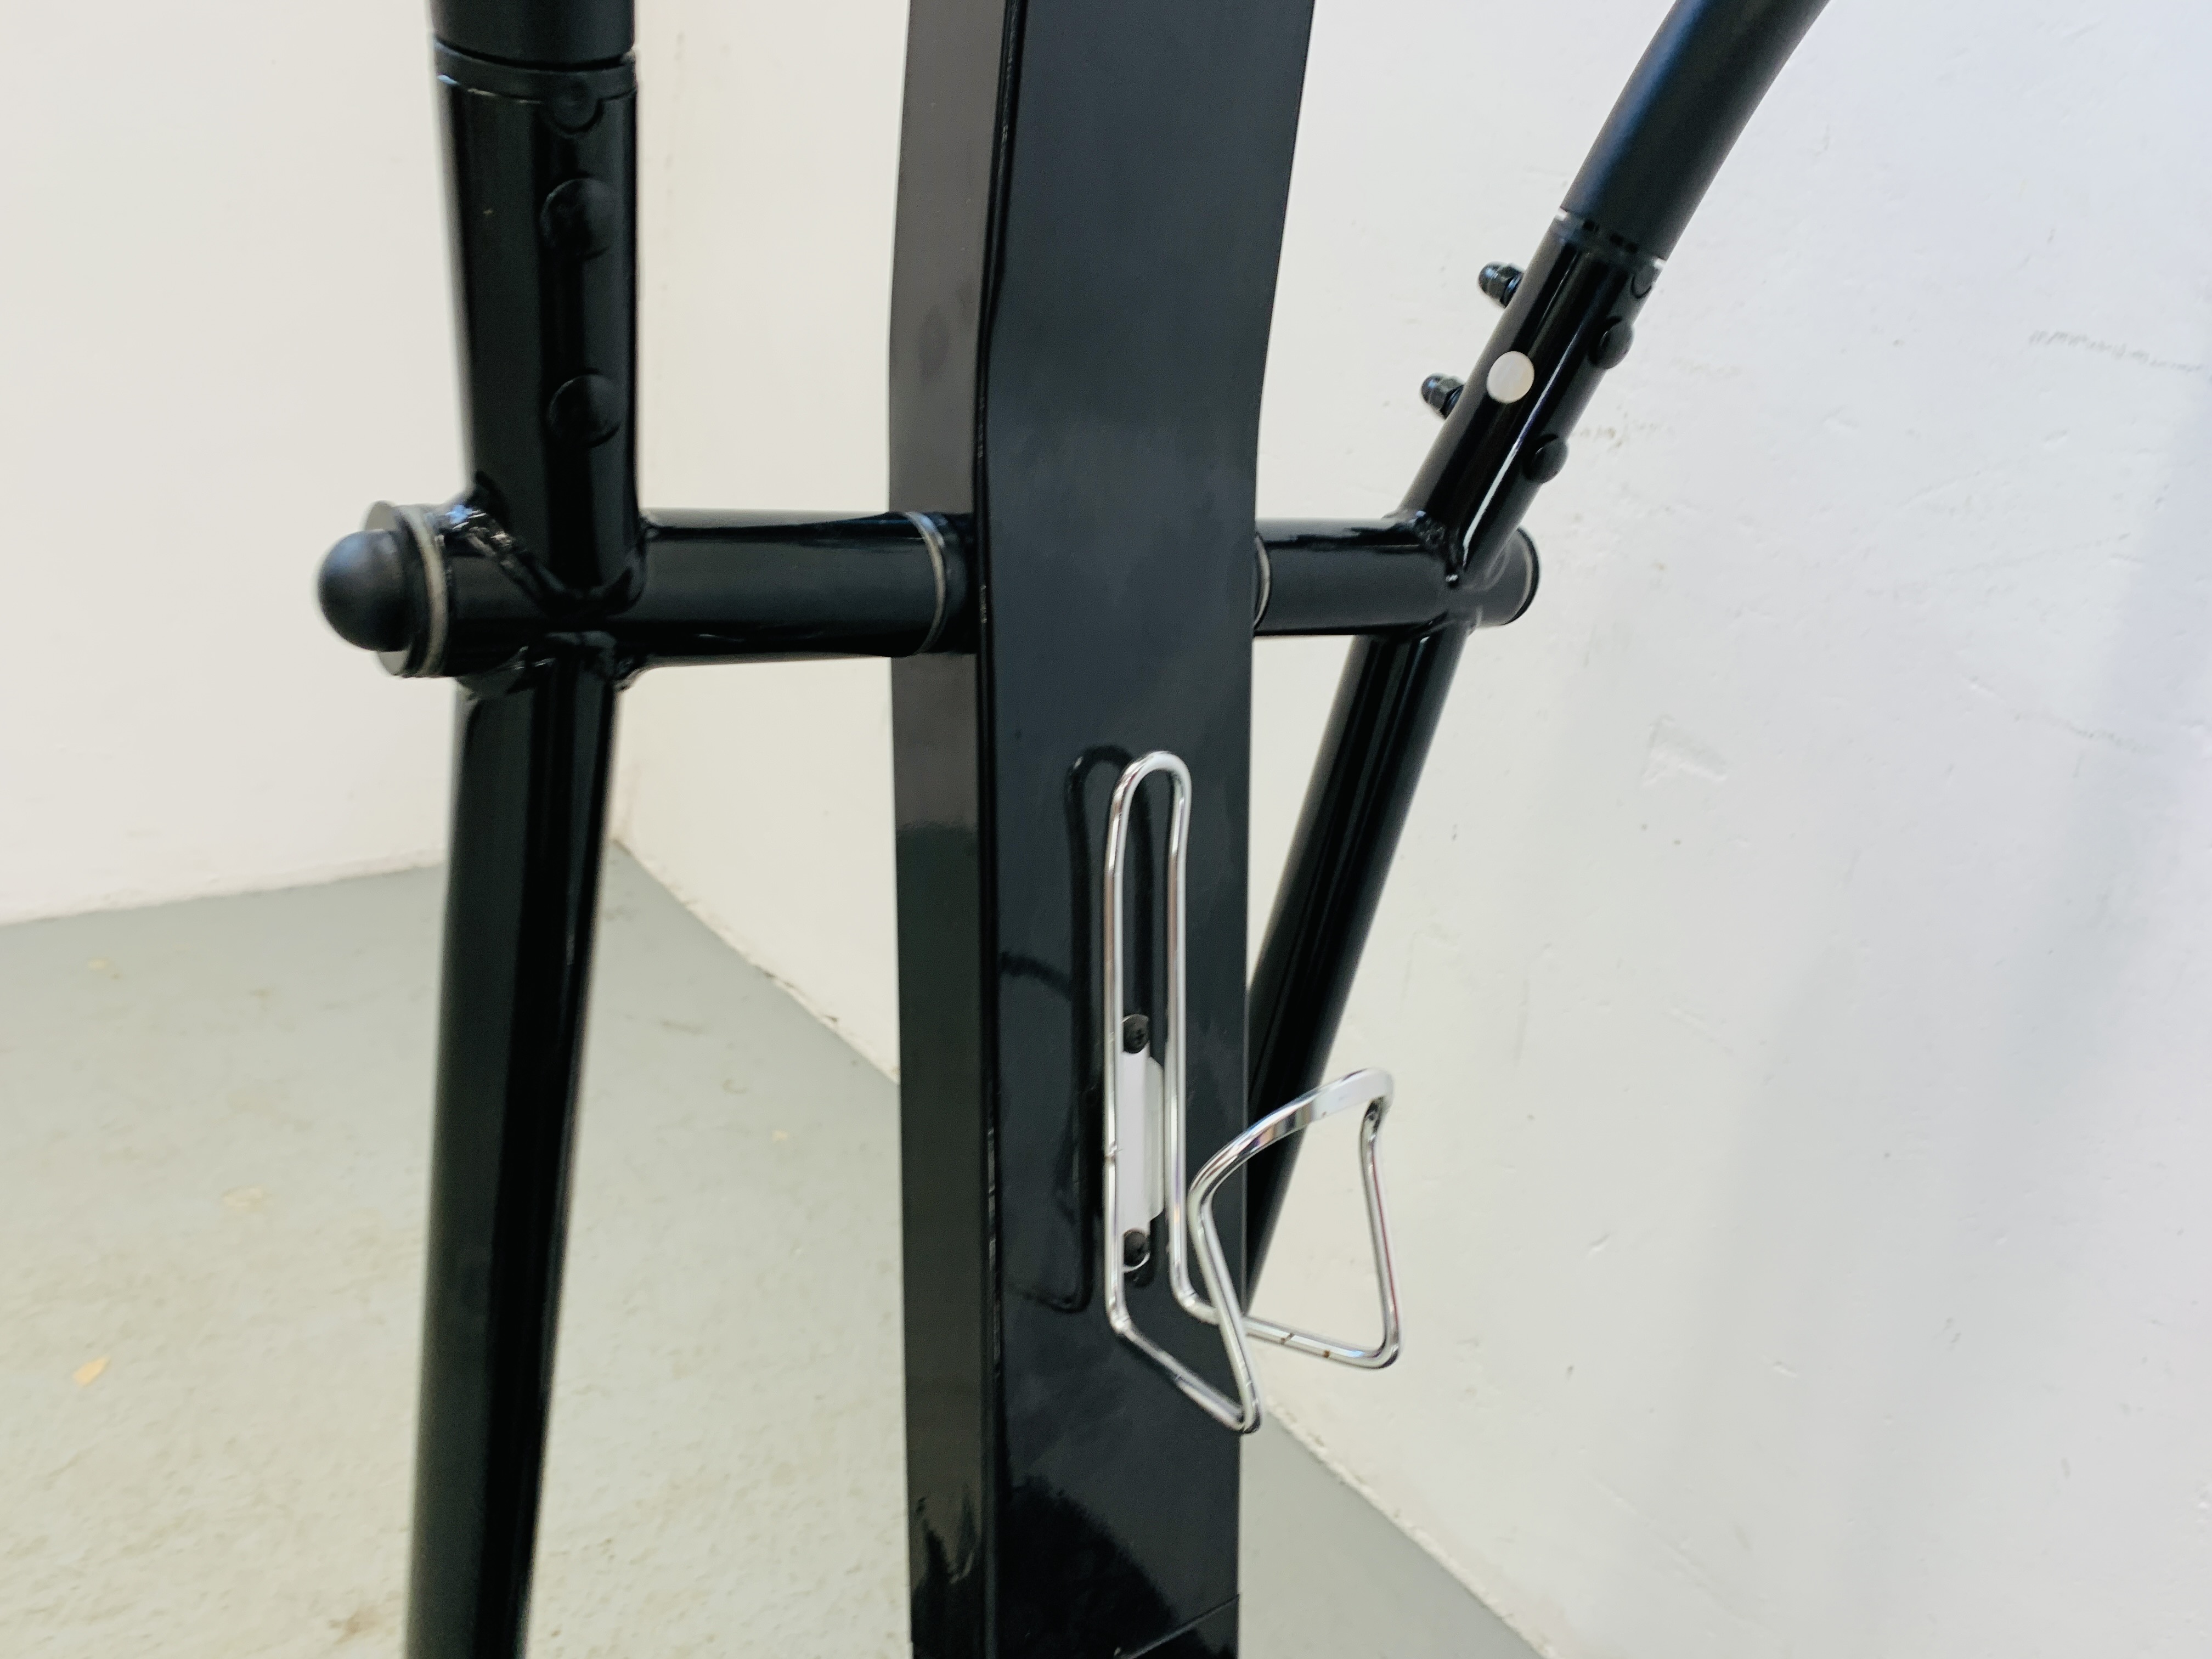 A KETTLER SELLA CROSS TRAINER - SOLD AS SEEN - Image 6 of 6